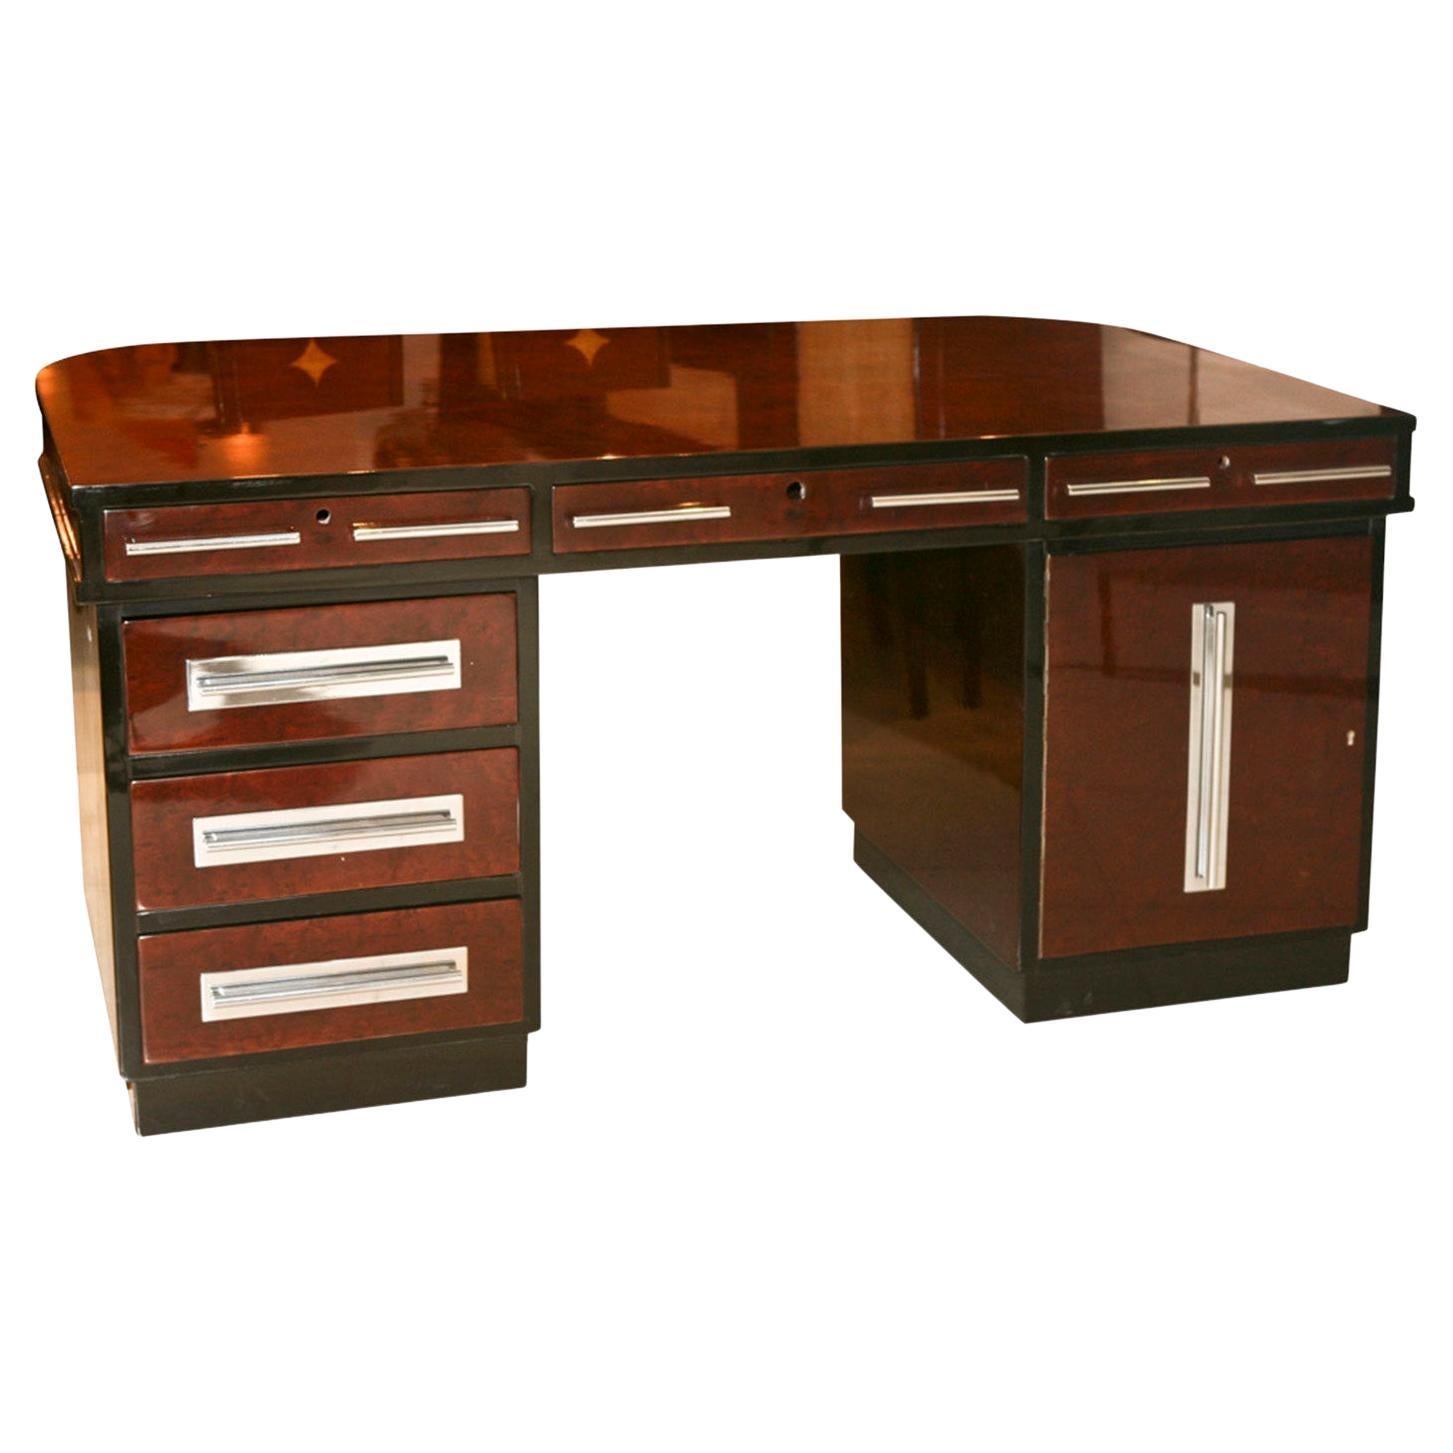 Desk with Shelves, Wood and Chrome from France 1920 "Free Shipping in Florida"